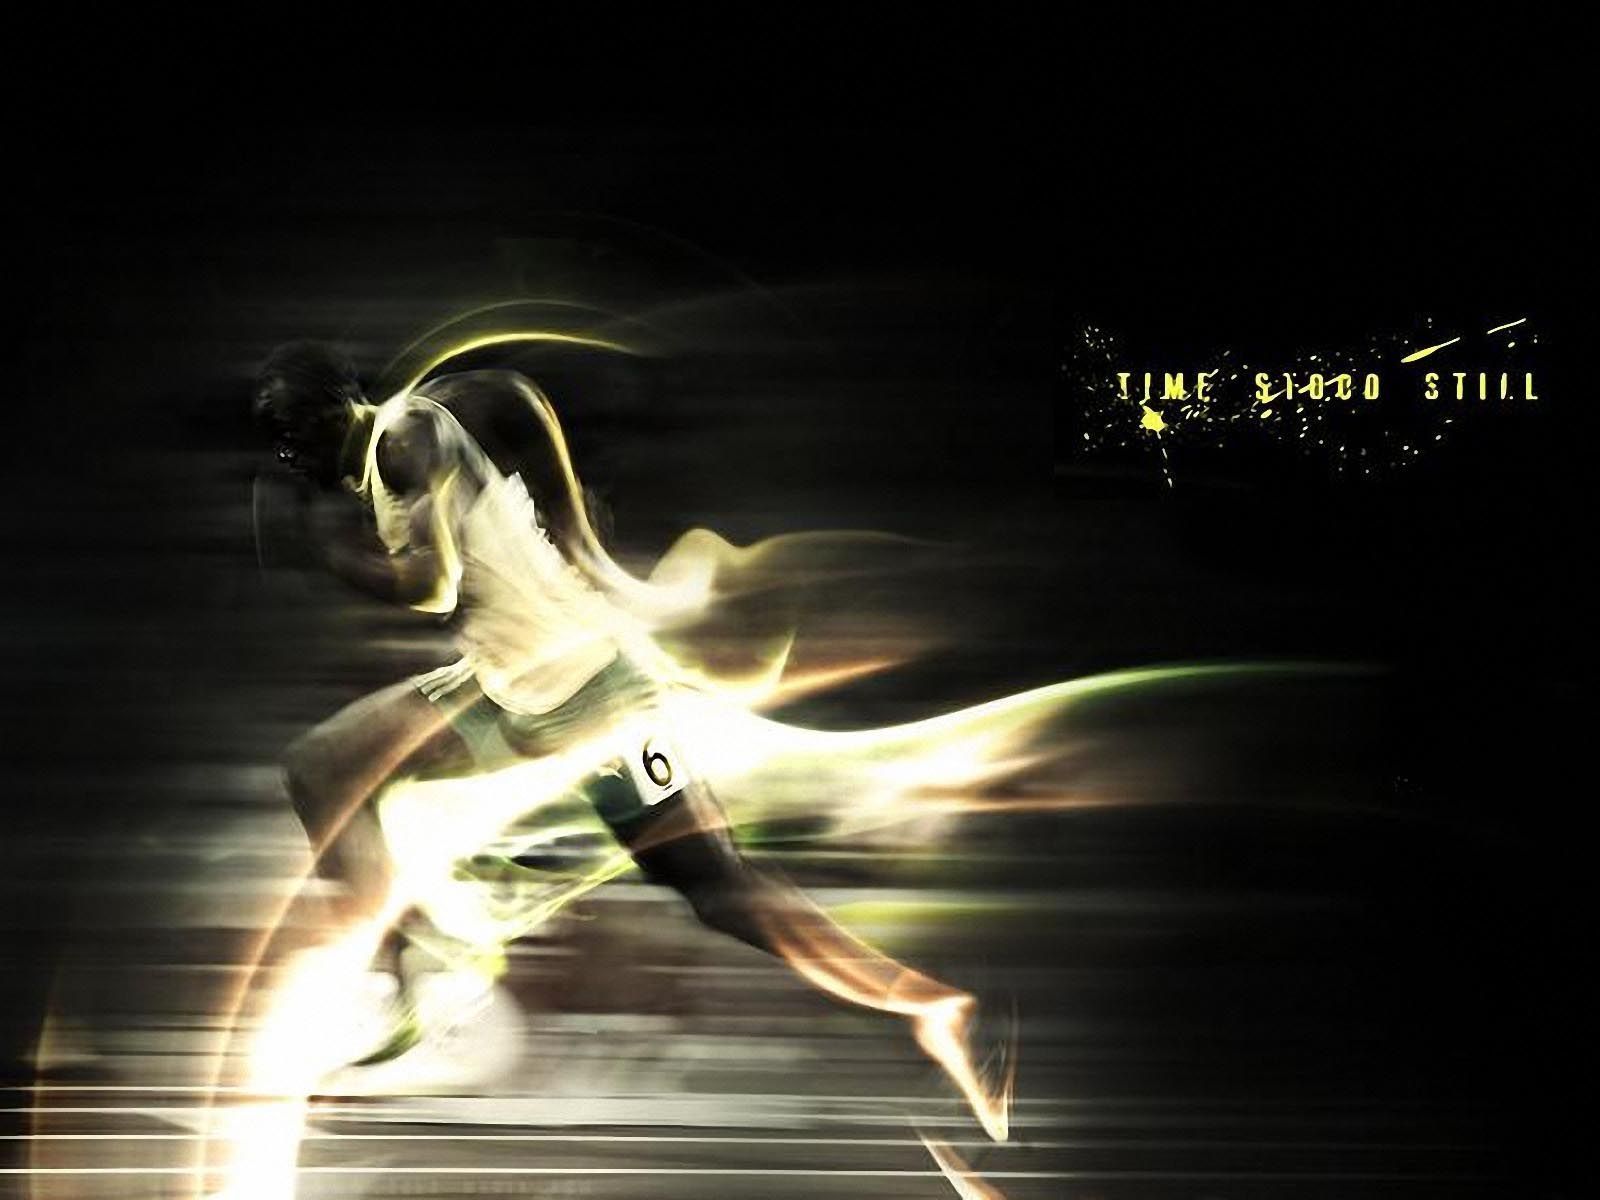 Usain Bolt Time Stood Still Wallpapers,Track And Field Wallpapers